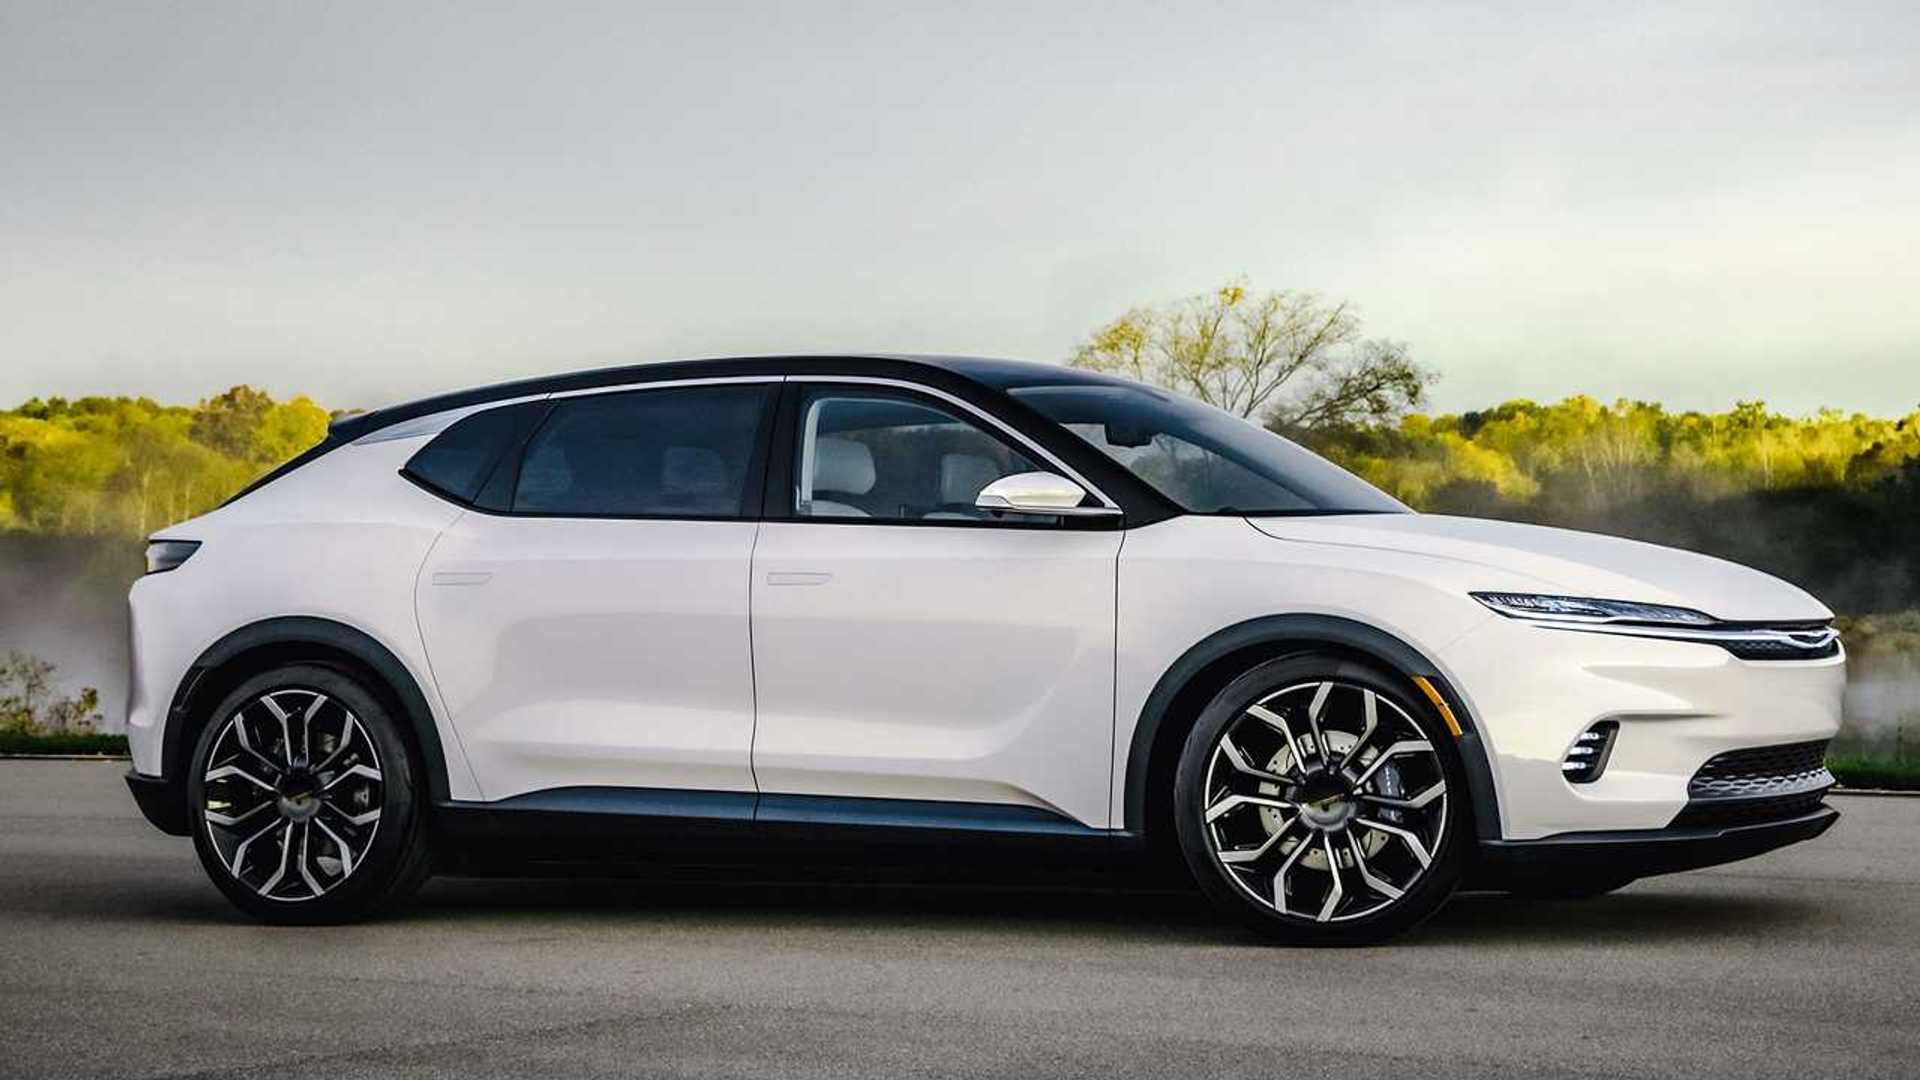 chrysler still aims for new ev in 2025, may be airflow-inspired: ceo